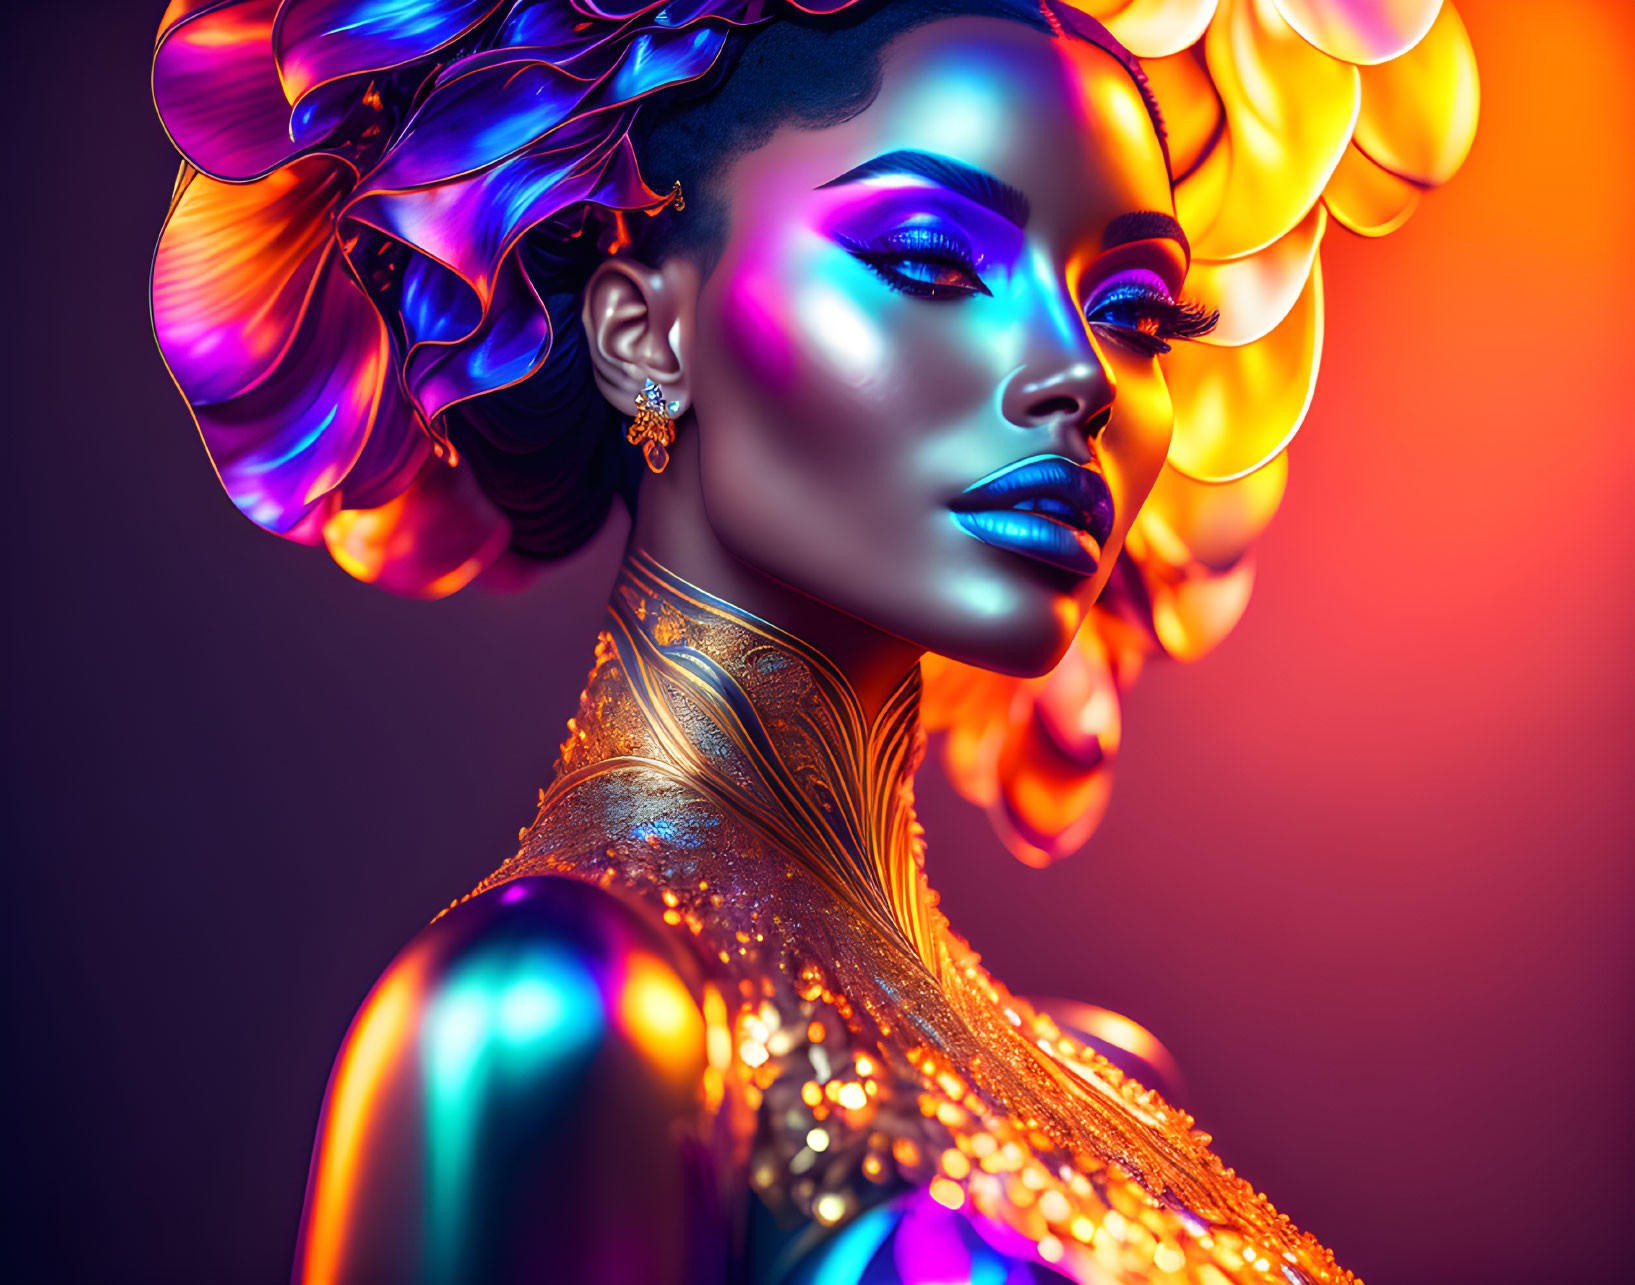 Colorful woman portrait with metallic body paint and flowing hair on neon background